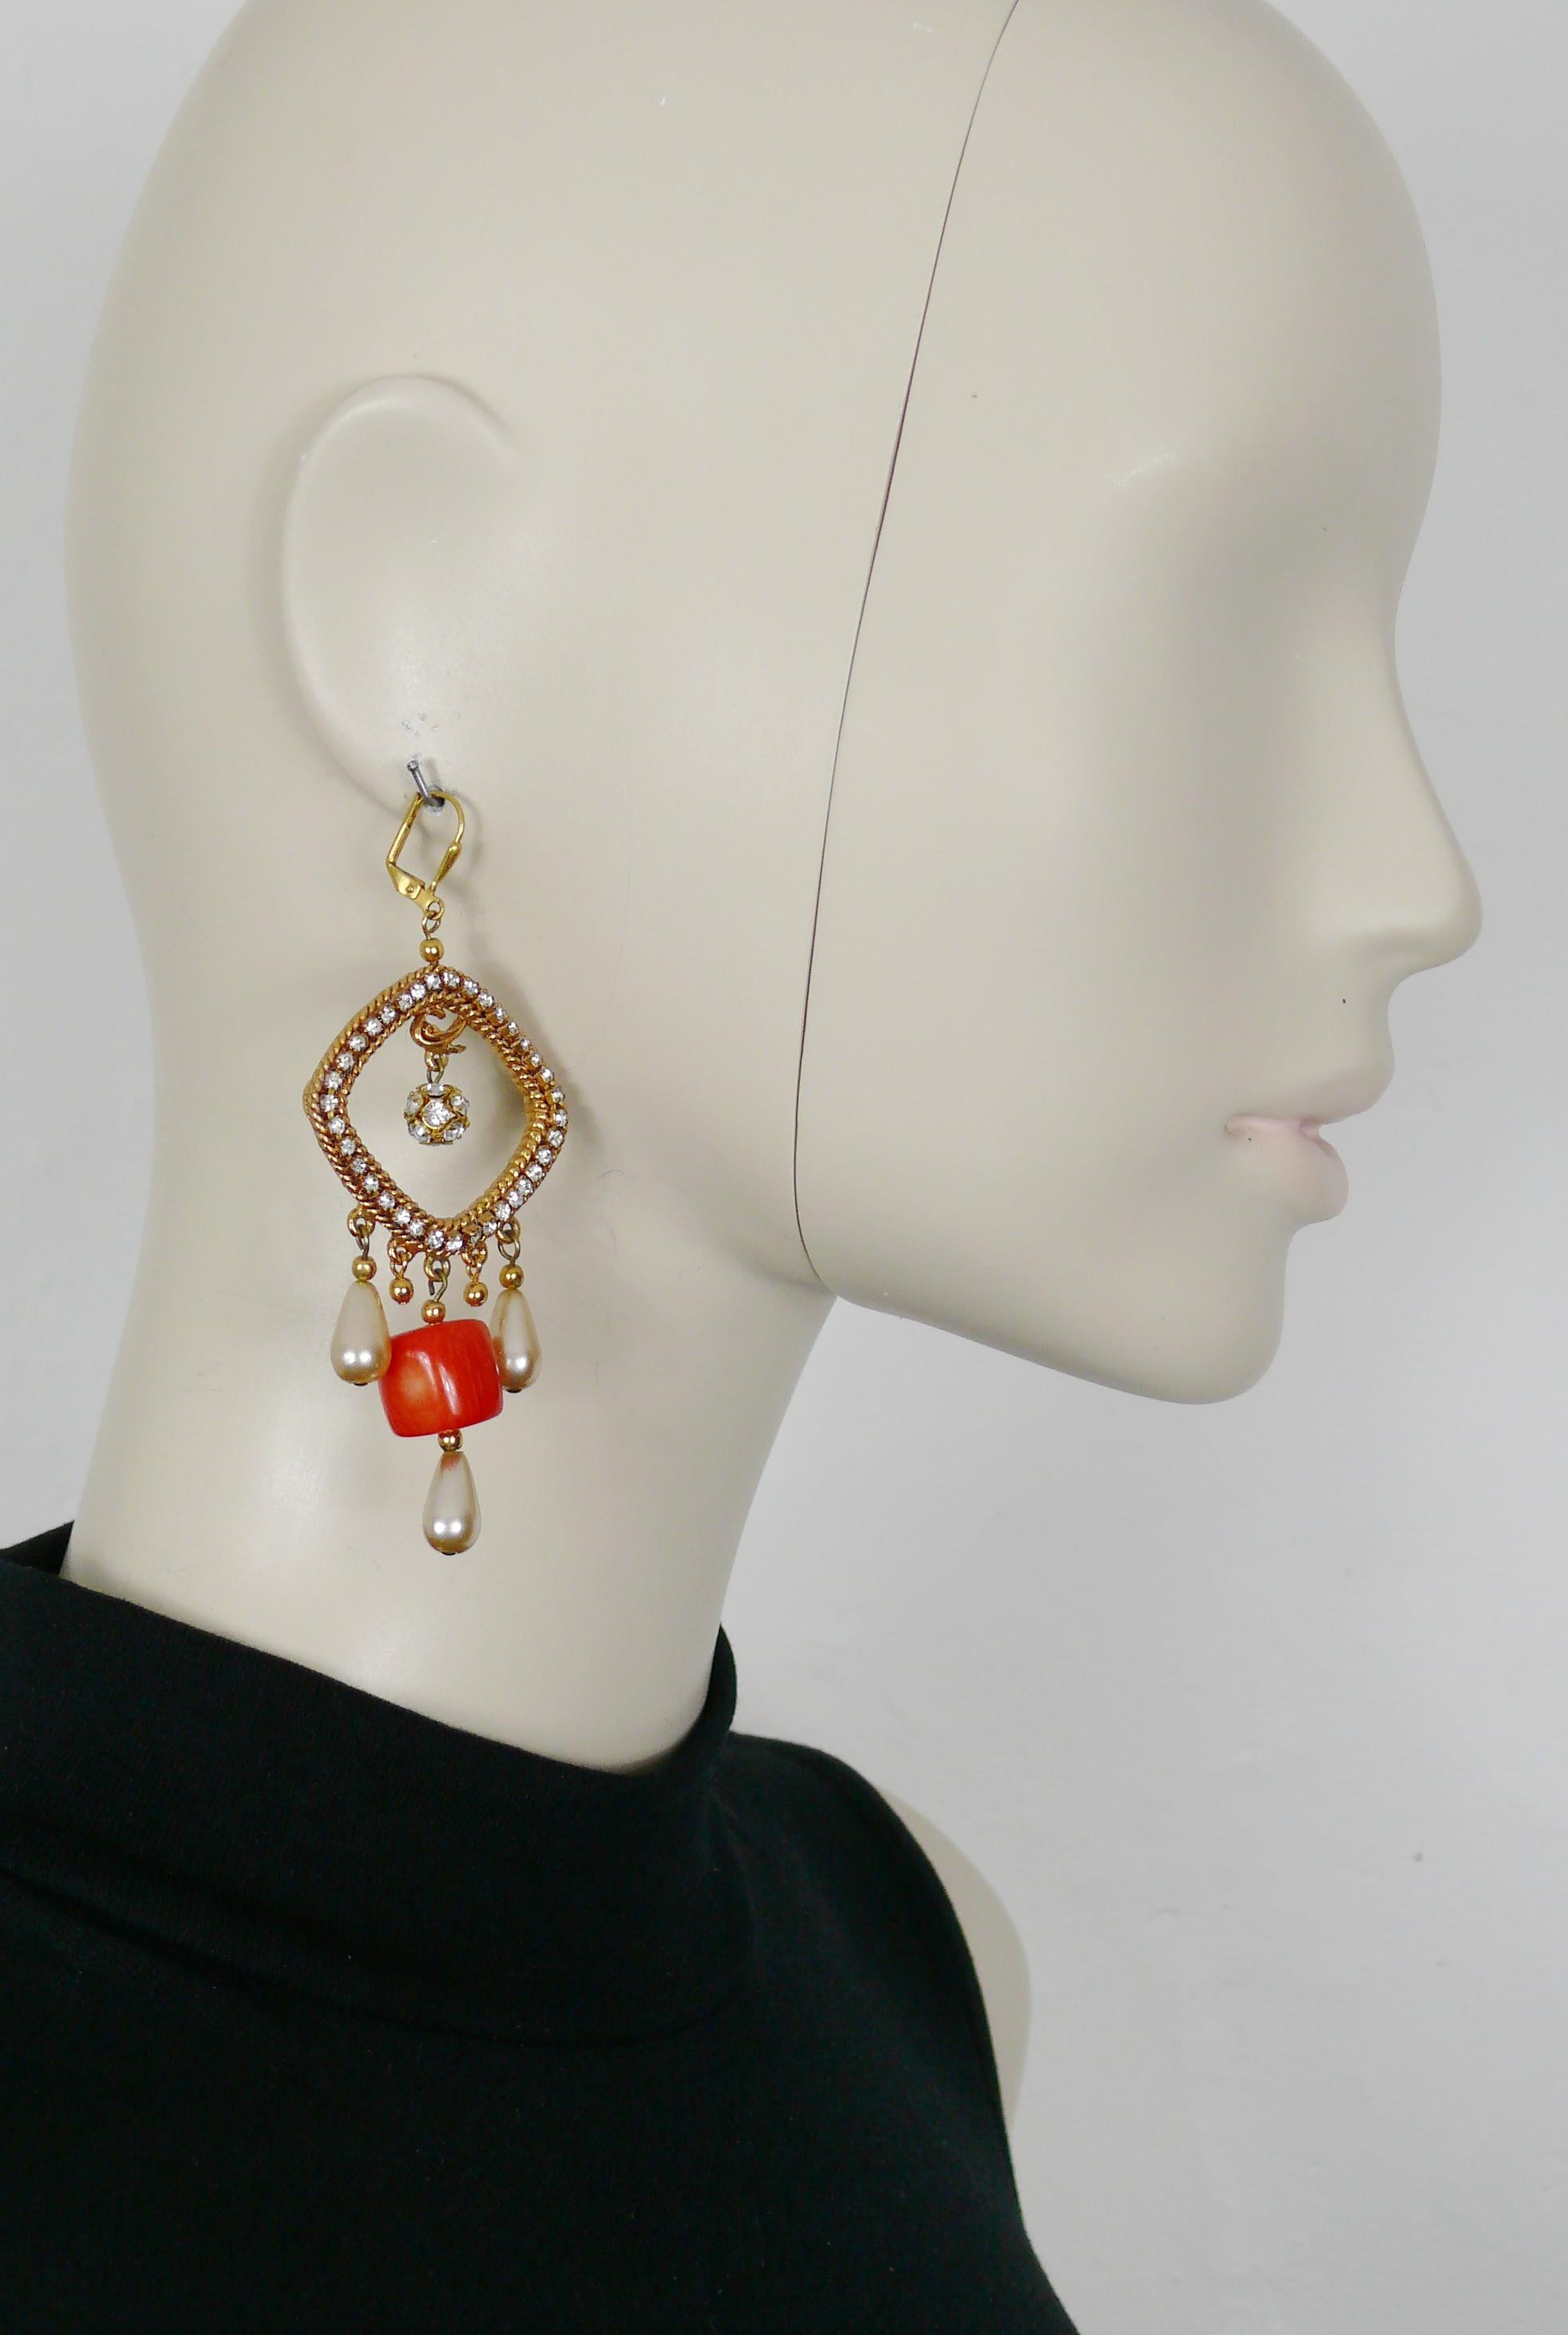 CHRISTIAN LACROIX vintage gold toned dangling earrings (for pierced ears) embellished with clear crystals, crystal ball, faux pearls and a large irregular shaped cylindrical red glass bead.

CL monogram on each earring.

Unmarked.

Indicative